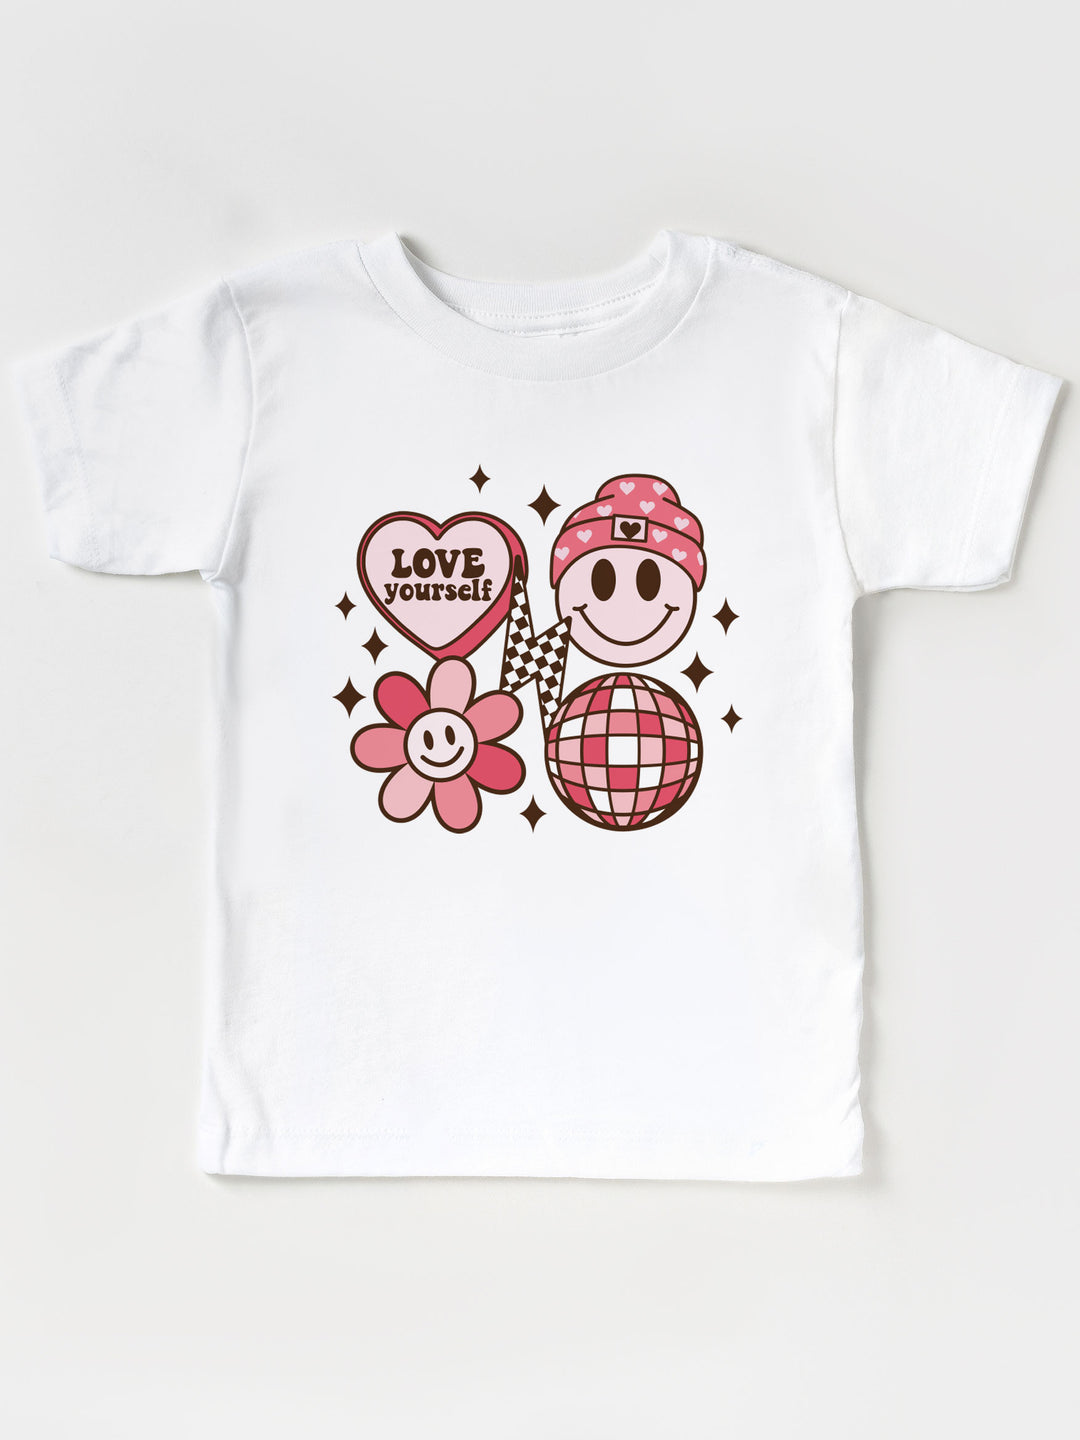 Love Yourself Smiley Face Graphic Tee